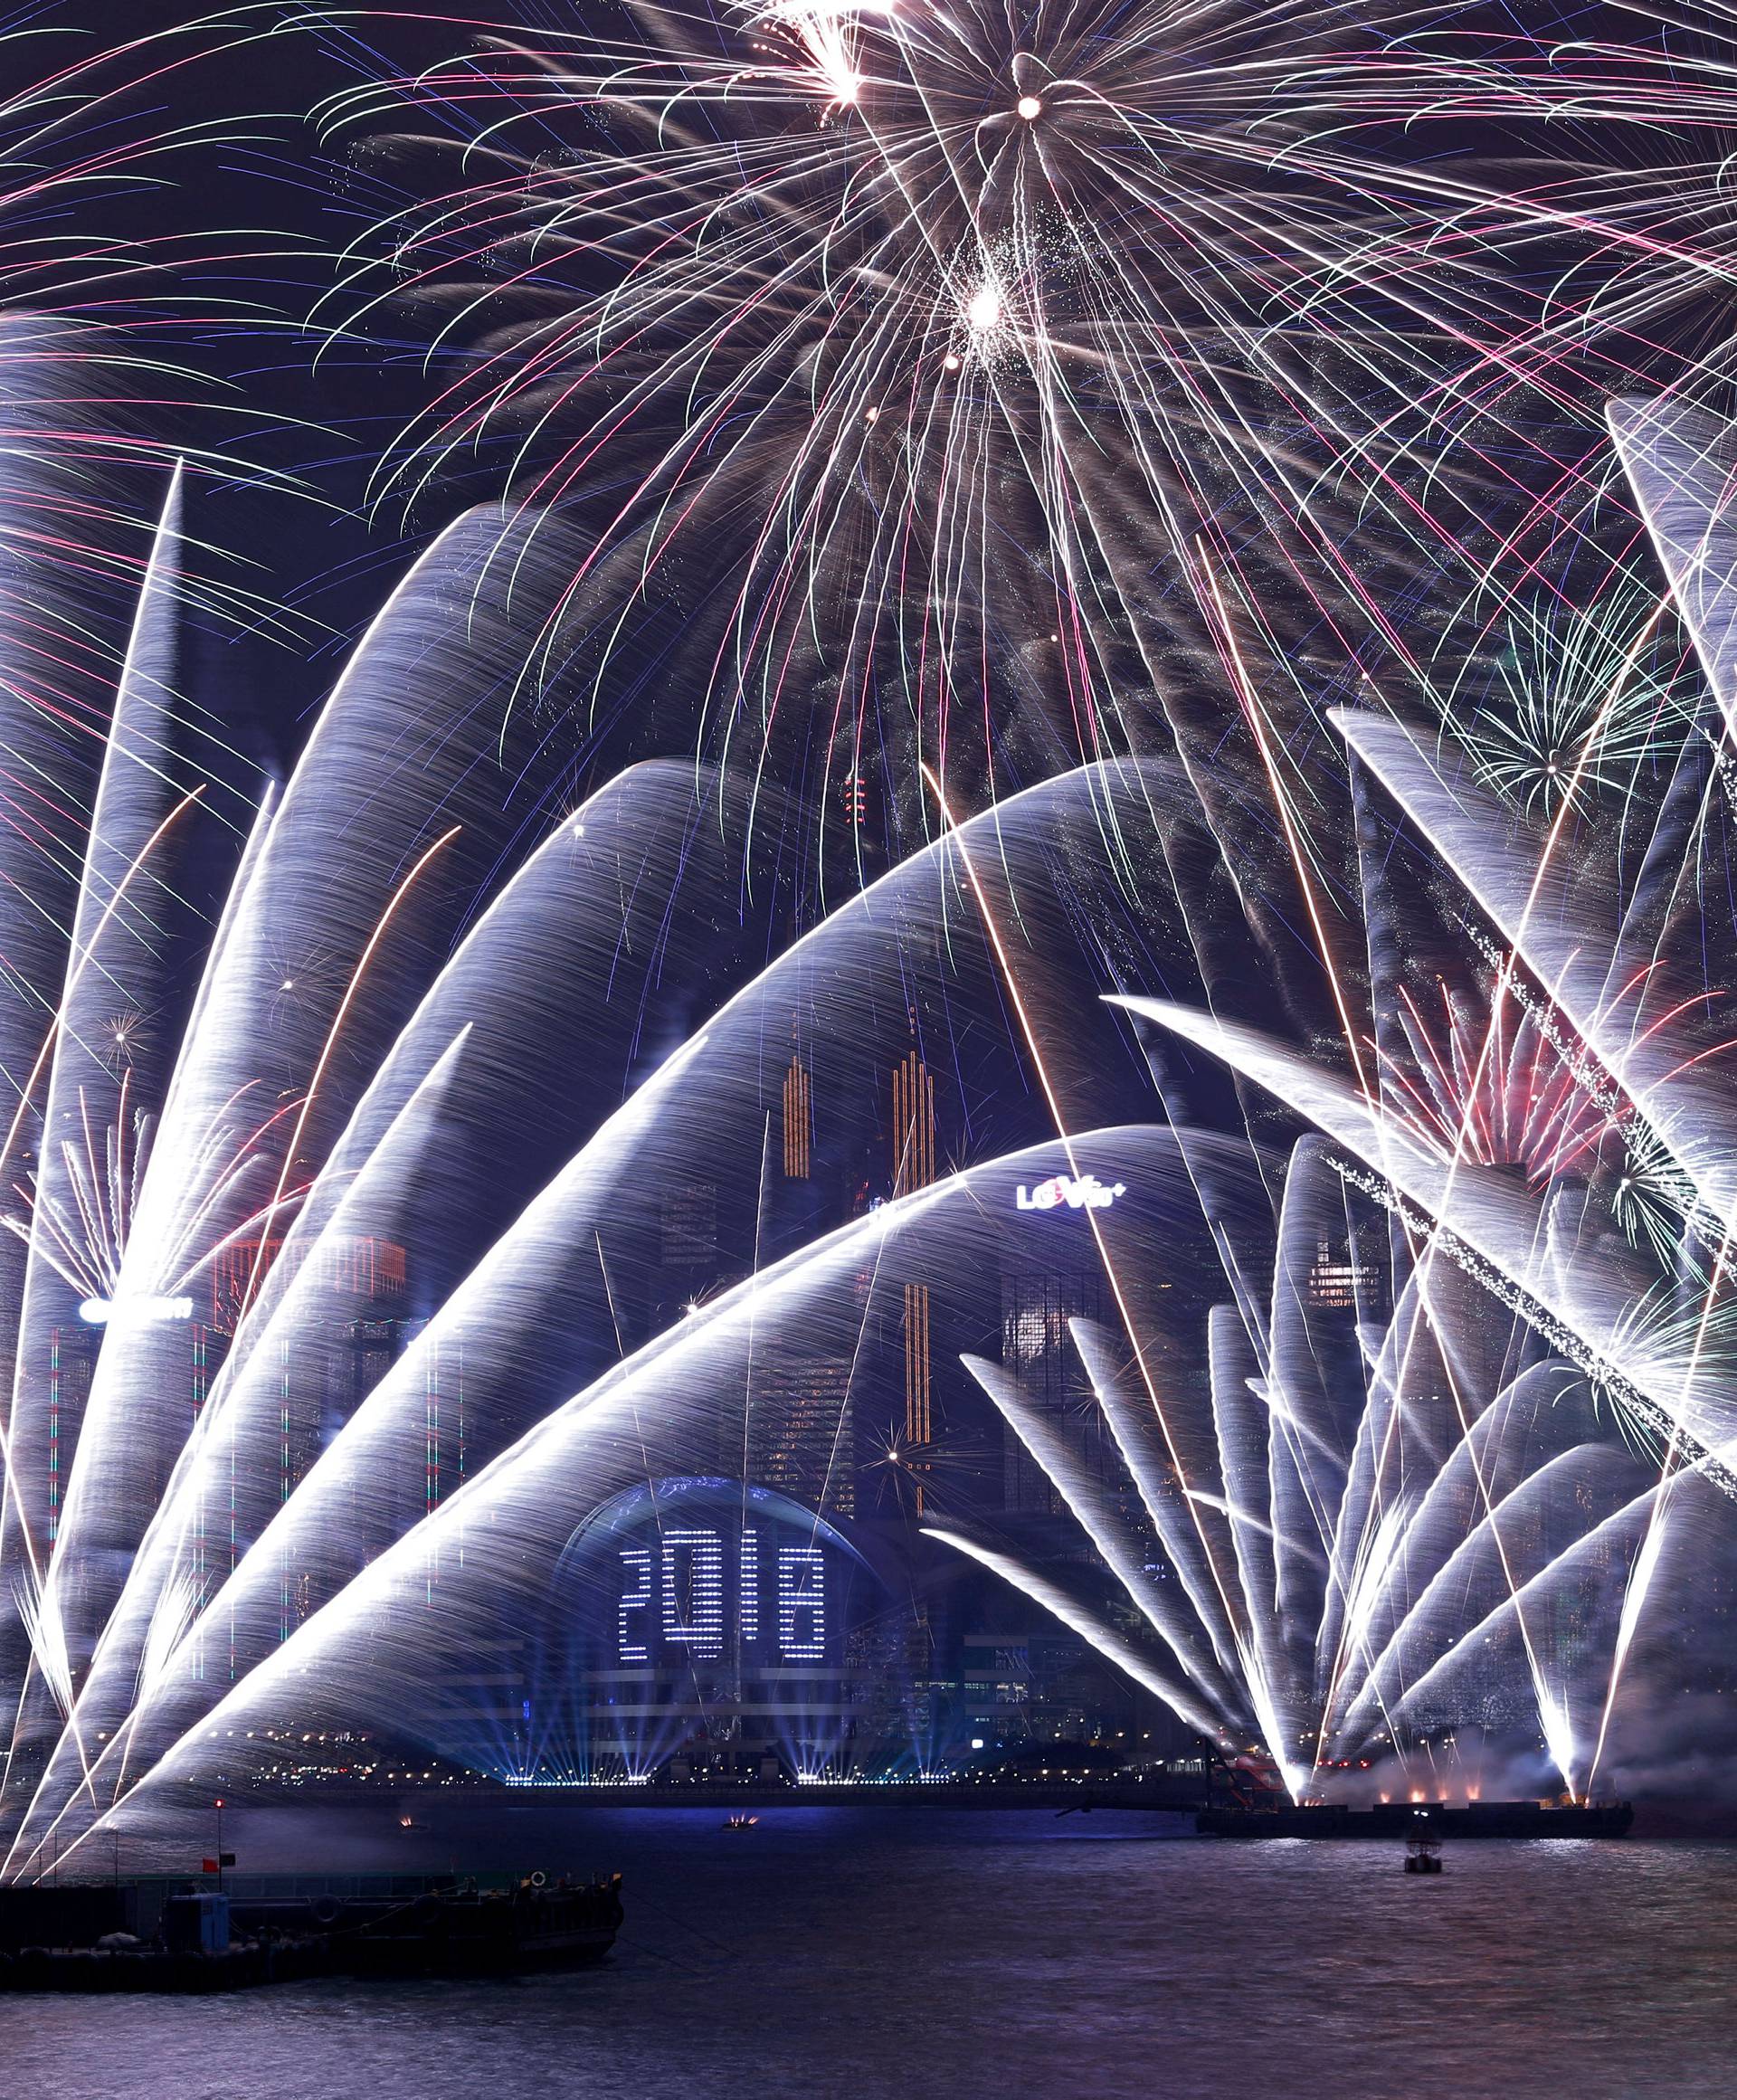 Fireworks explode over Victoria Harbour and Hong Kong Convention and Exhibition Centre during a pyrotechnic show to celebrate the New Year in Hong Kong